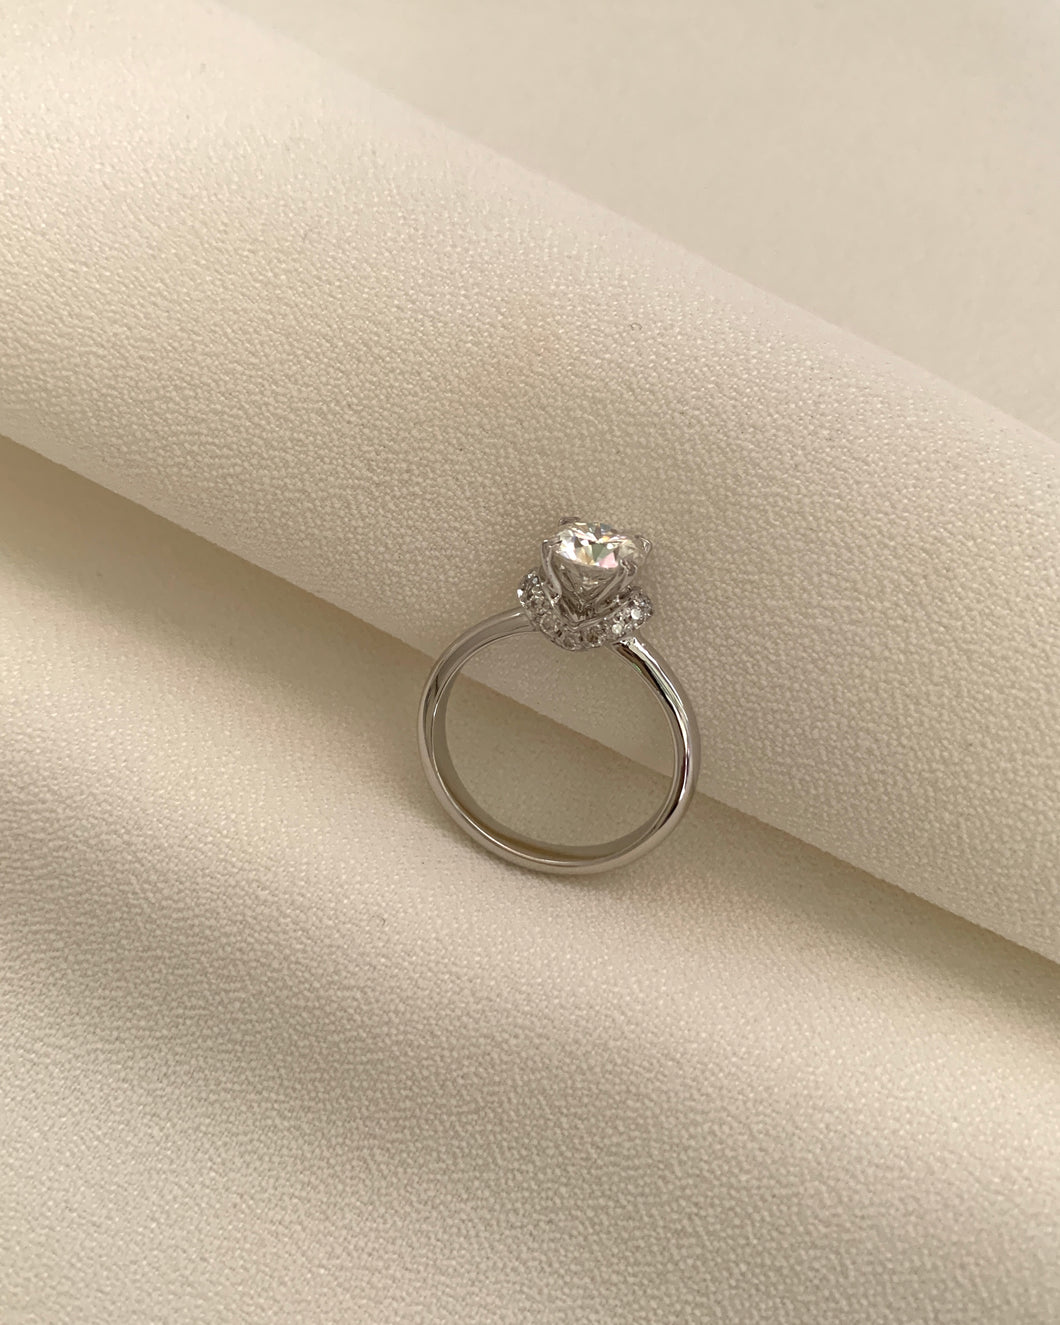 A 1 Carat Round Moissanite with An Enclustered Diamond Collar Set in 14K White Gold.